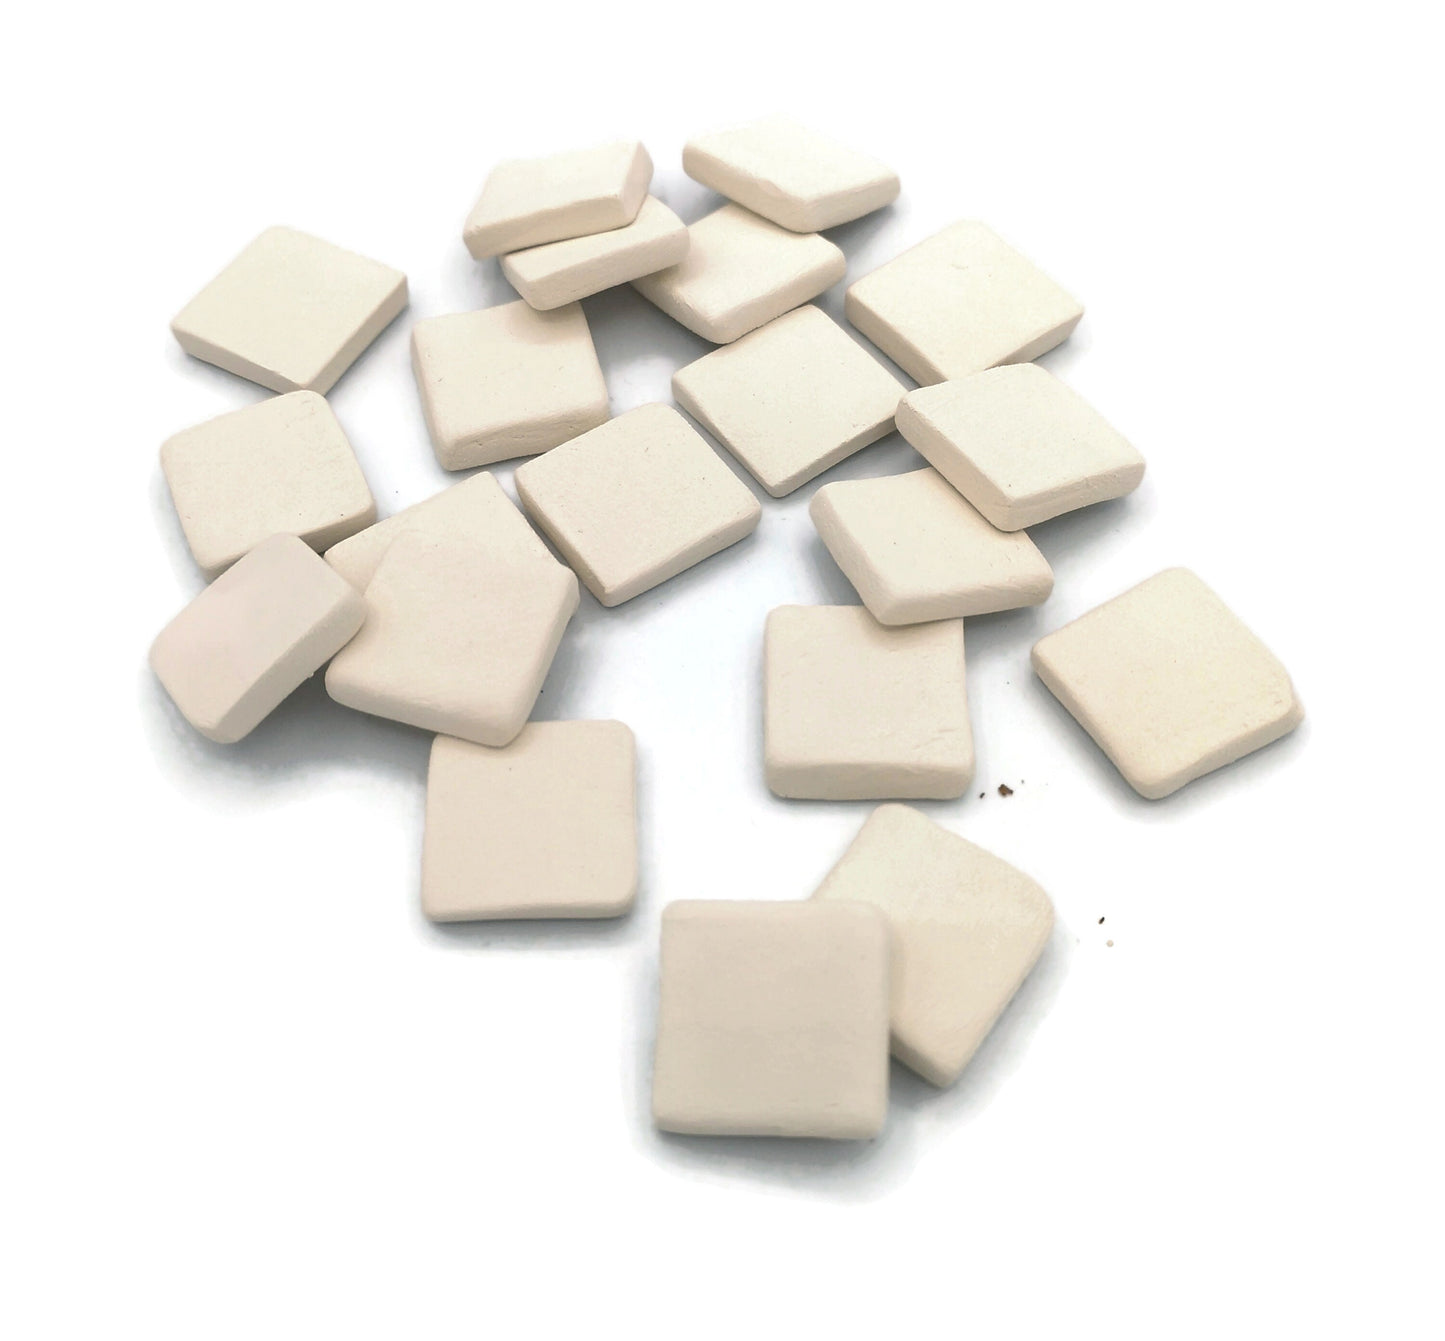 20Pc 20mm Handmade Small Bisque Ceramic Mosaic Tiles For Crafts, Blank Tiny Unpainted Squares or Stars Ready to Paint - Ceramica Ana Rafael